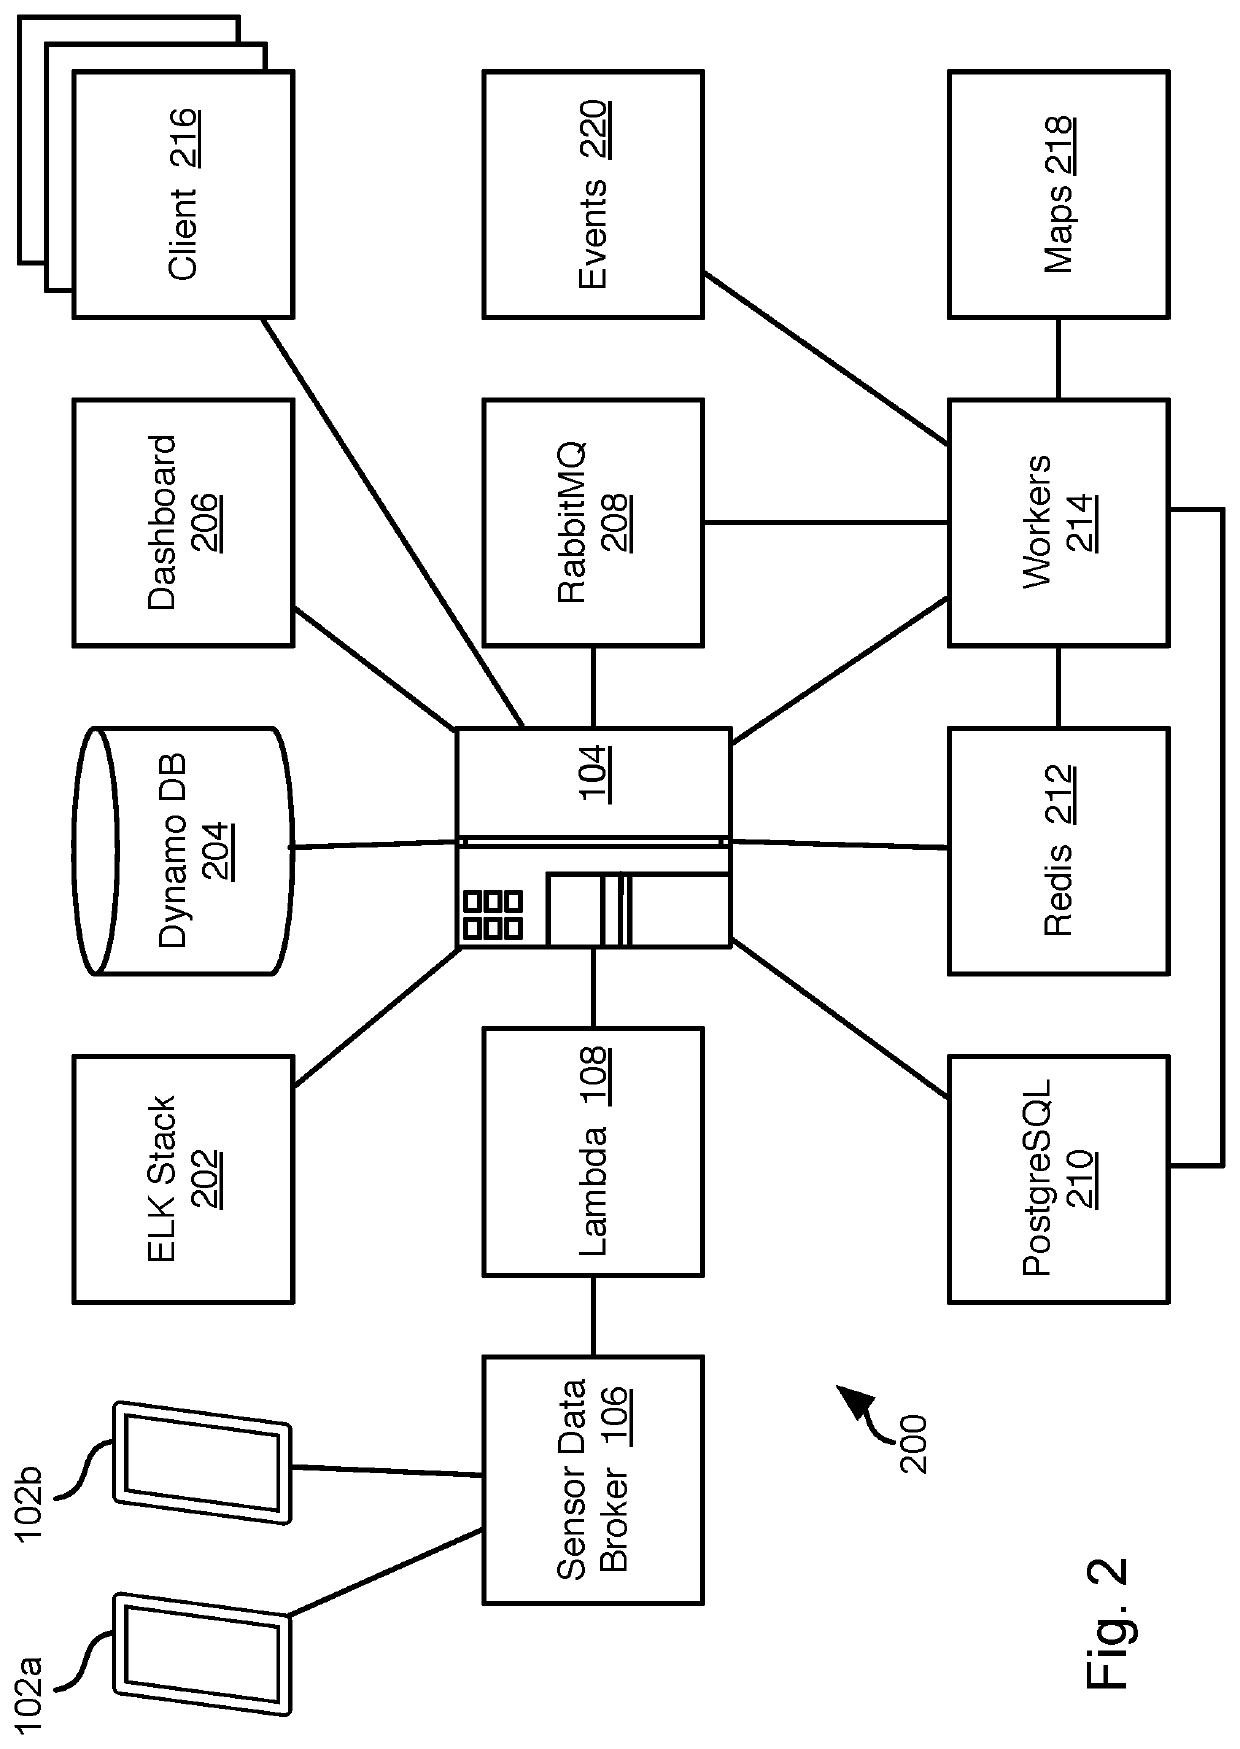 Systems and methods for receiving sensor data from a mobile device